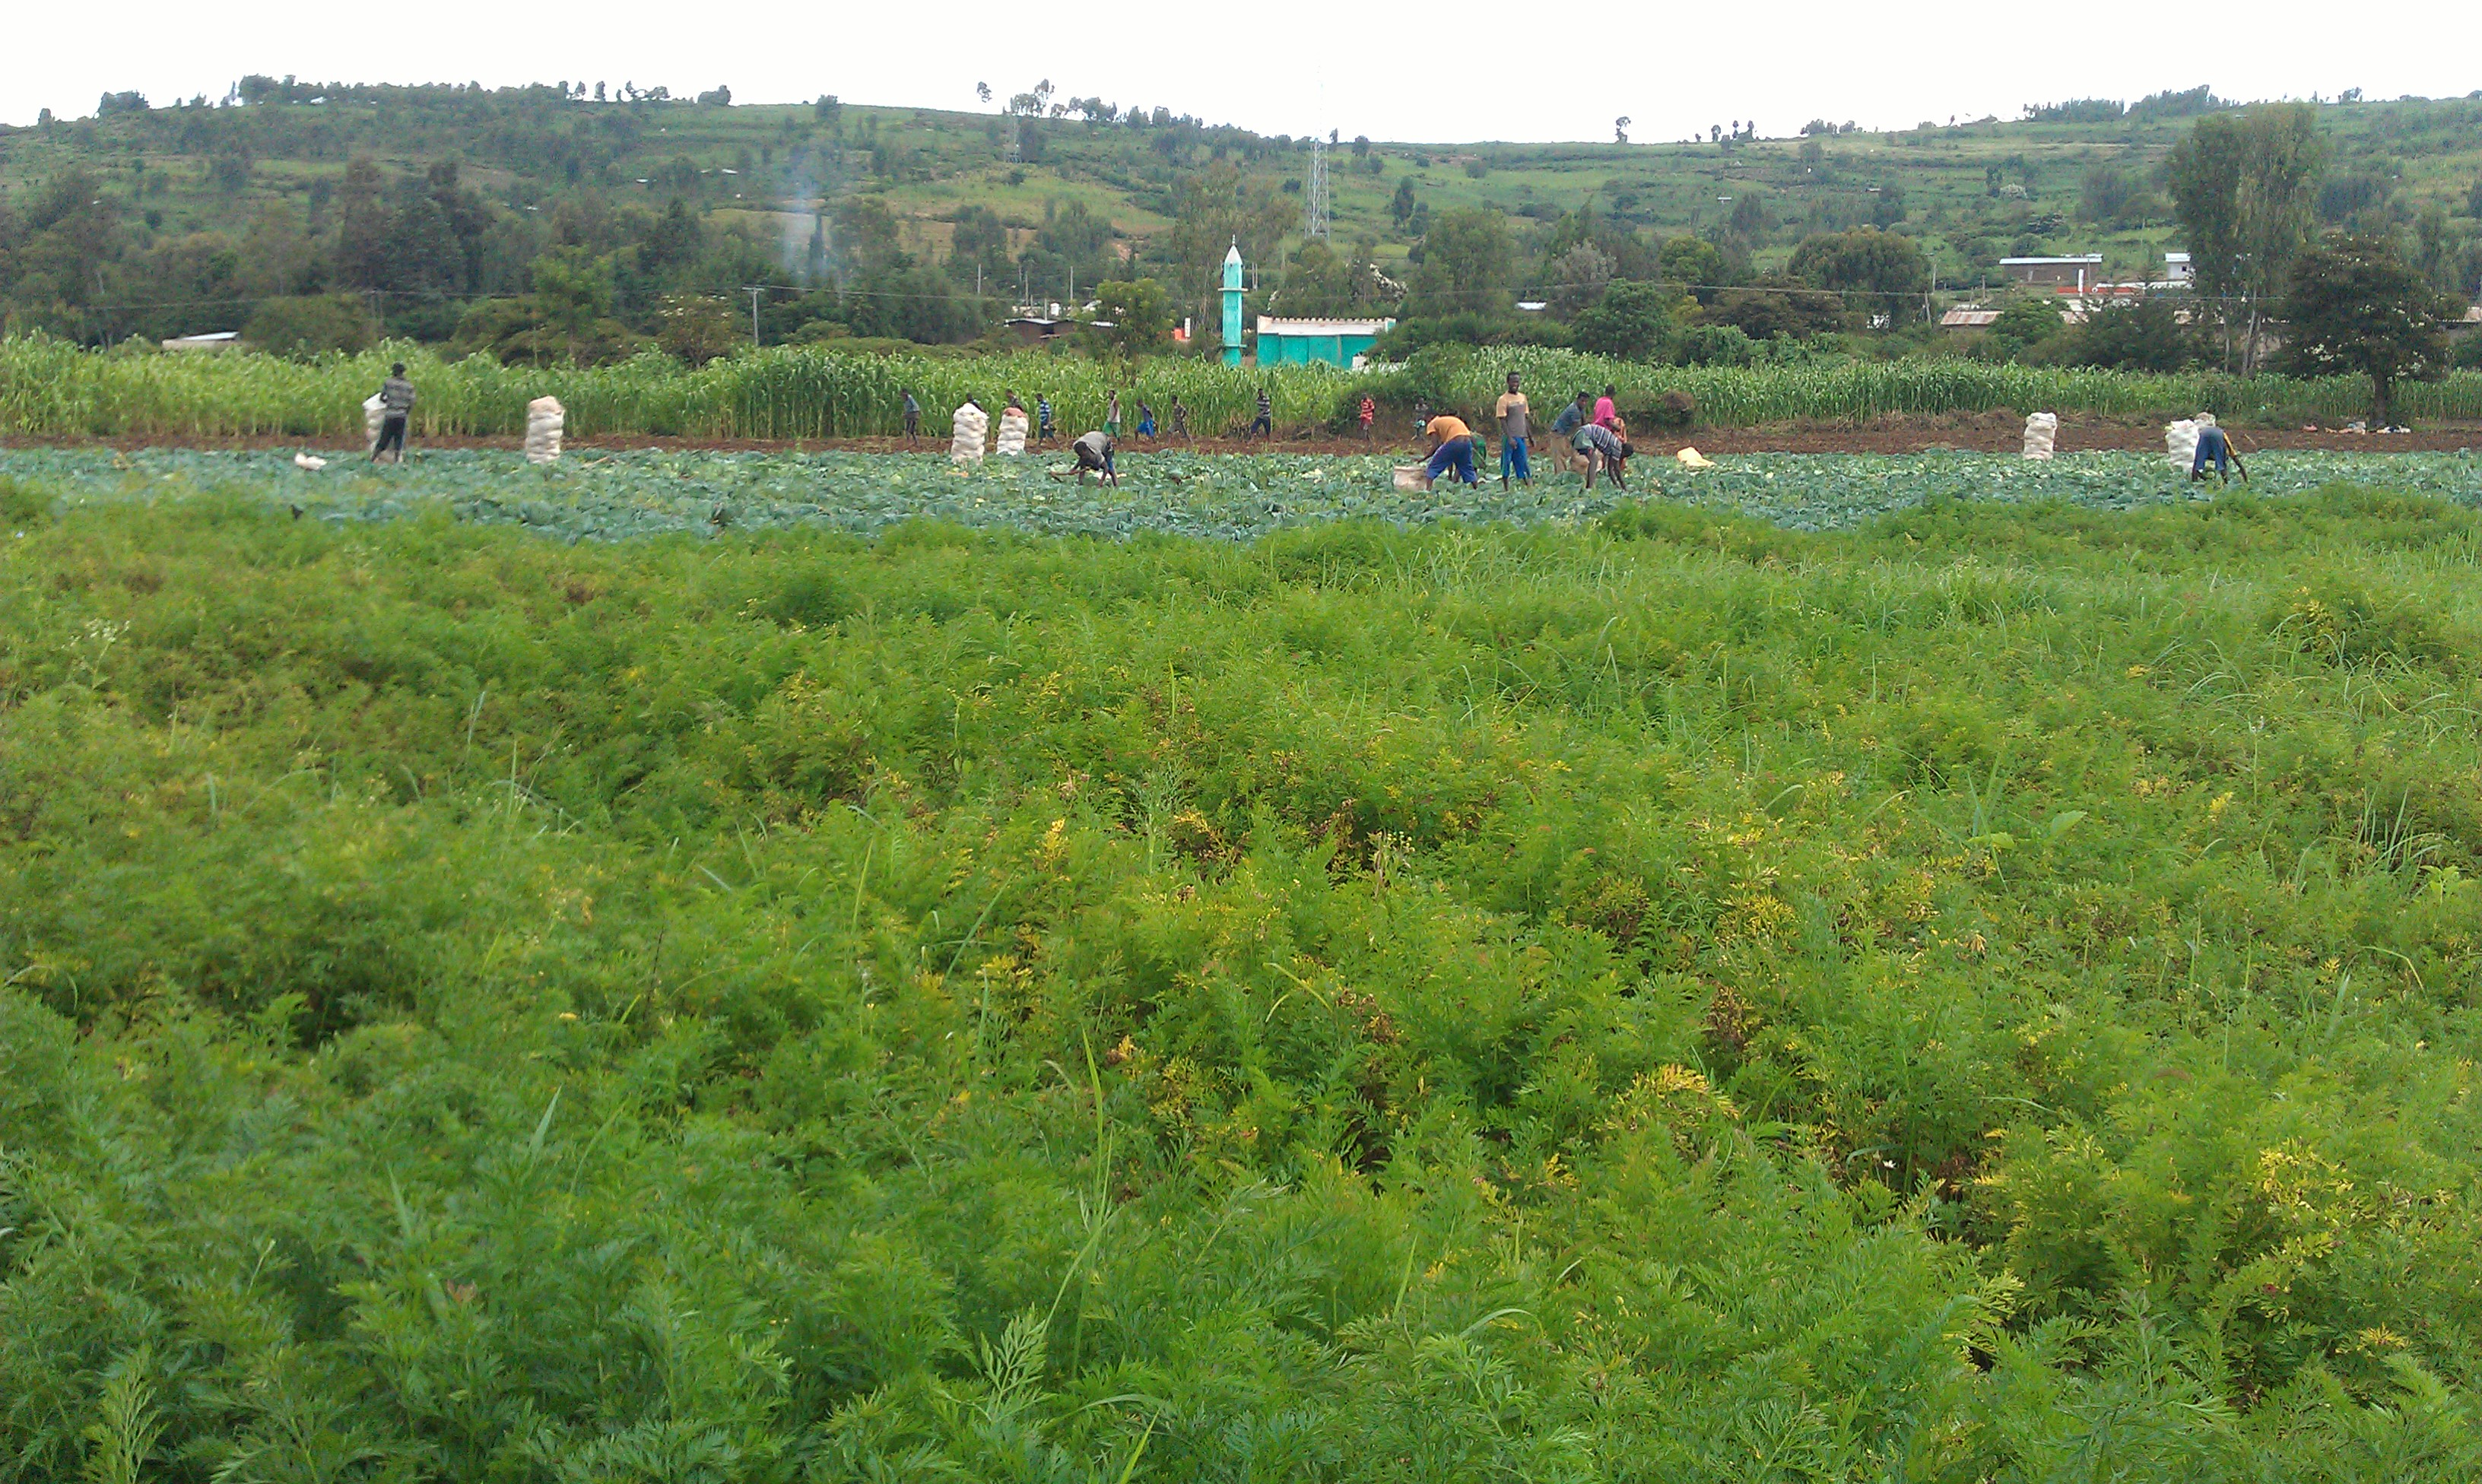 Wage labour at commercial farm